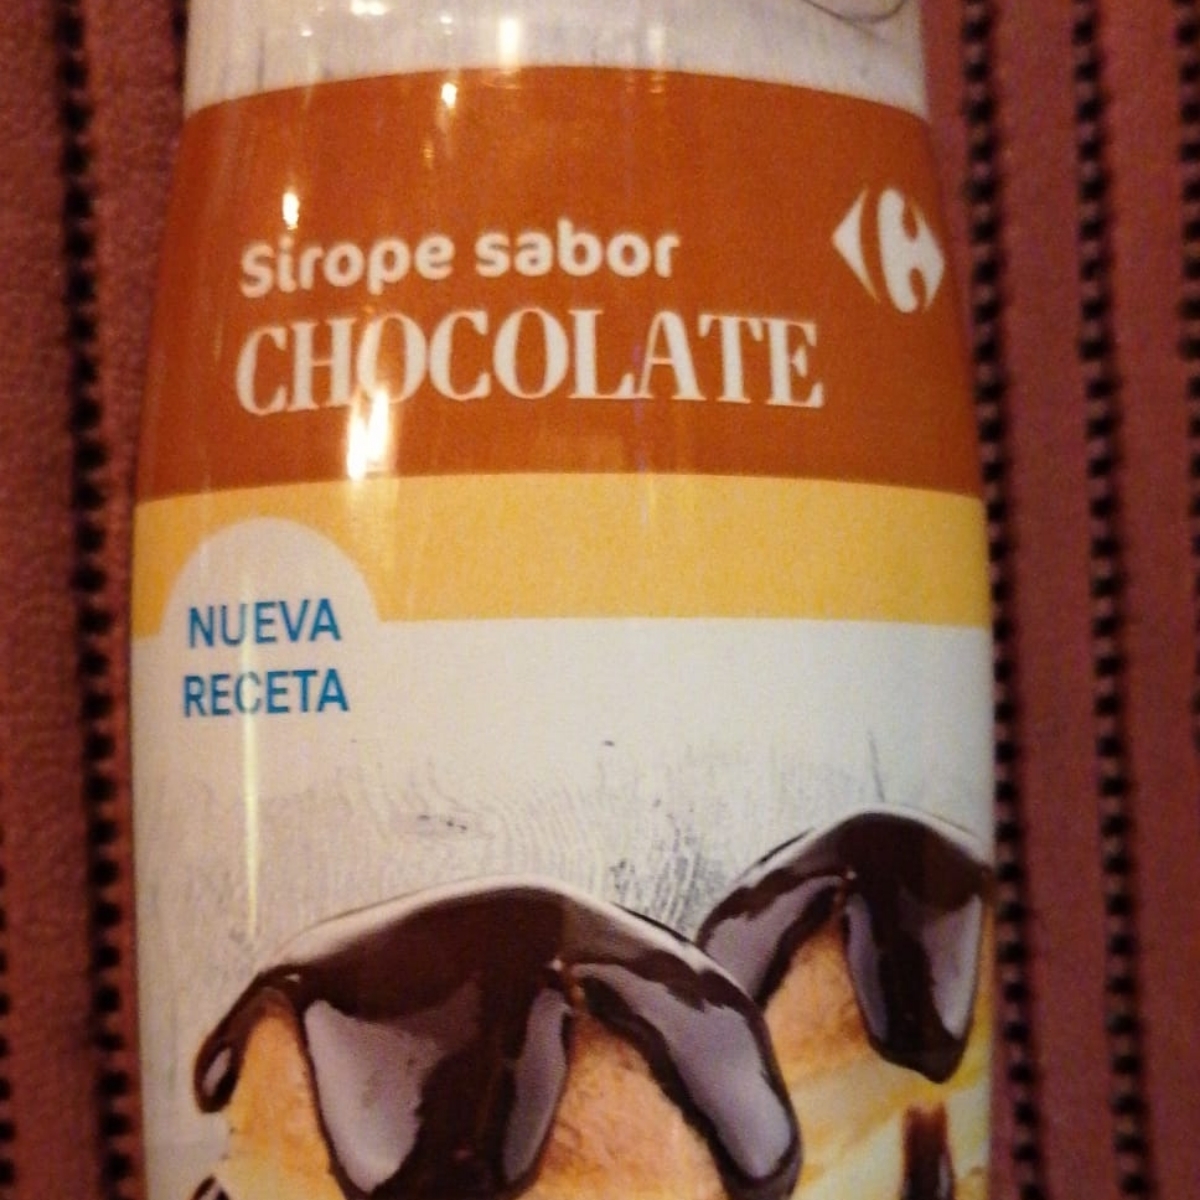 Carrefour Sirope sabor chocolate Review